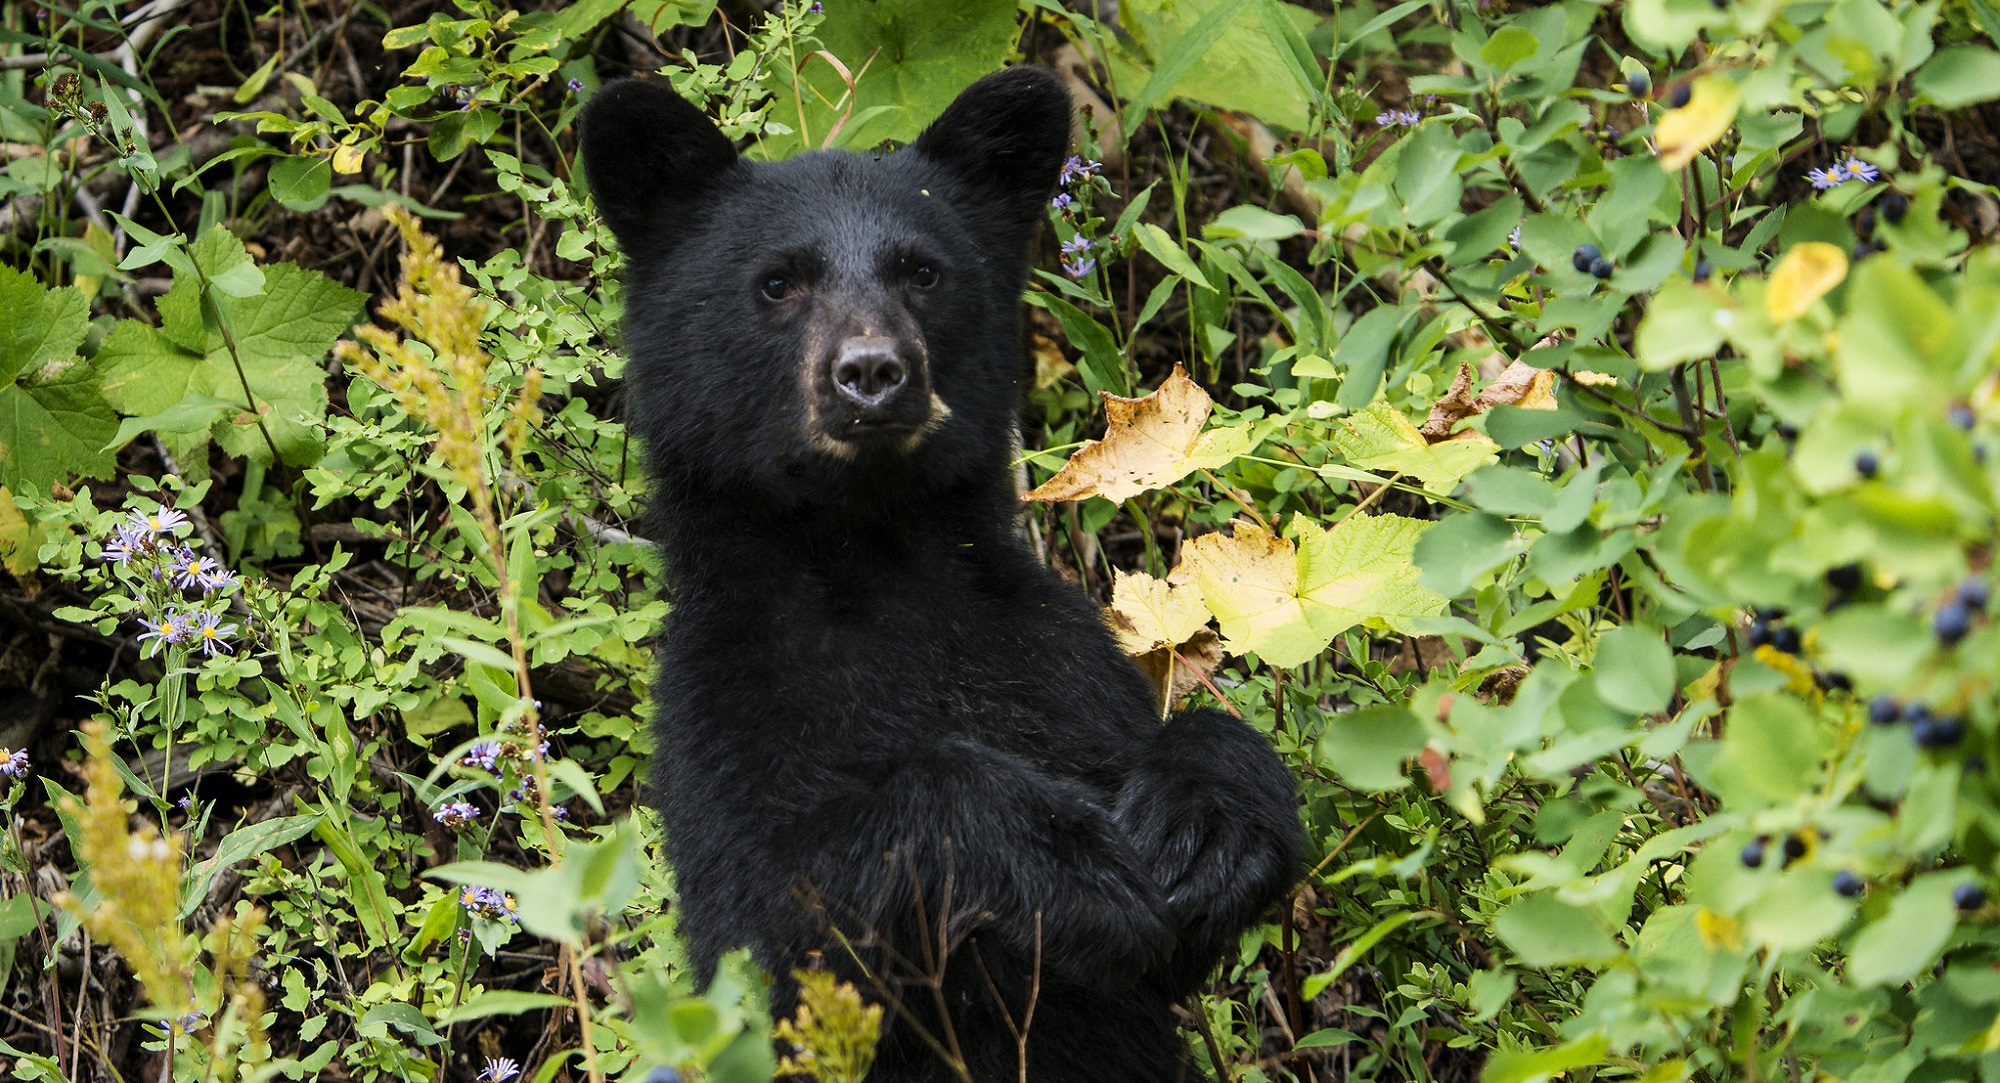 Bears can count, take selfies, use tools, recognize supermodels, and even open car doors